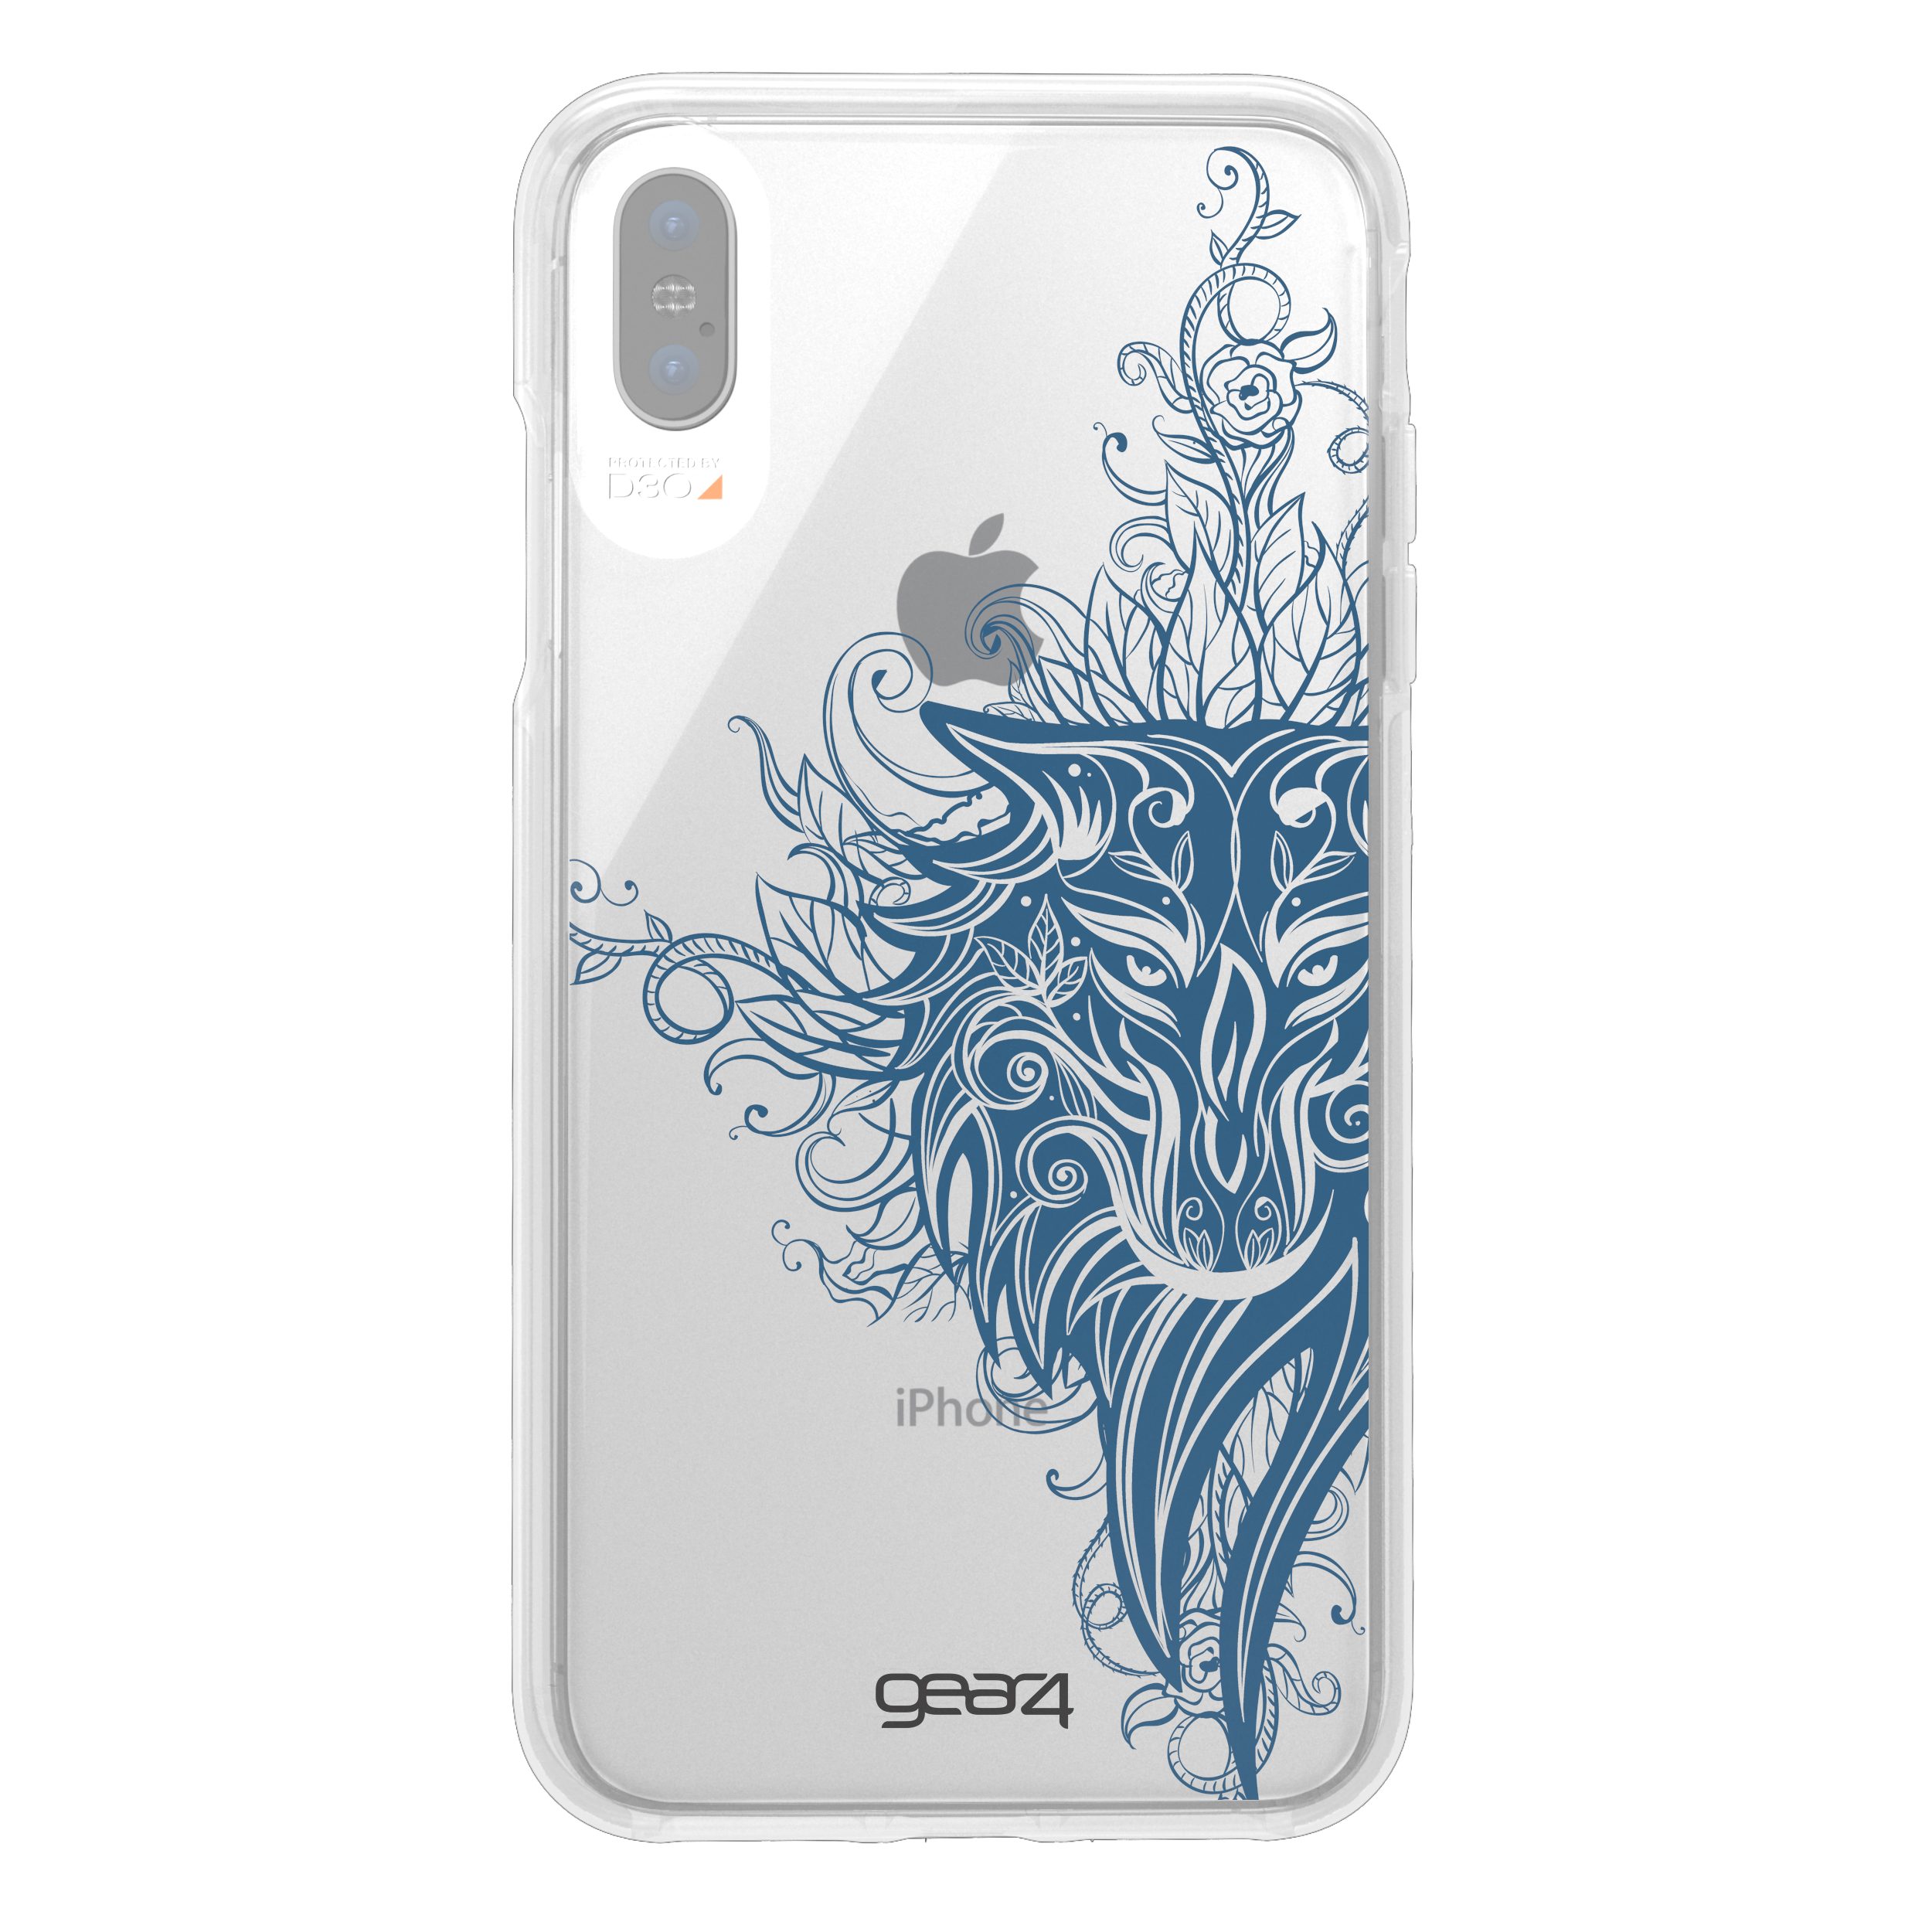 Gear4 Backcover Chelsea Tattoo Art for iPhone X/Xs colourful 35263 BUNT